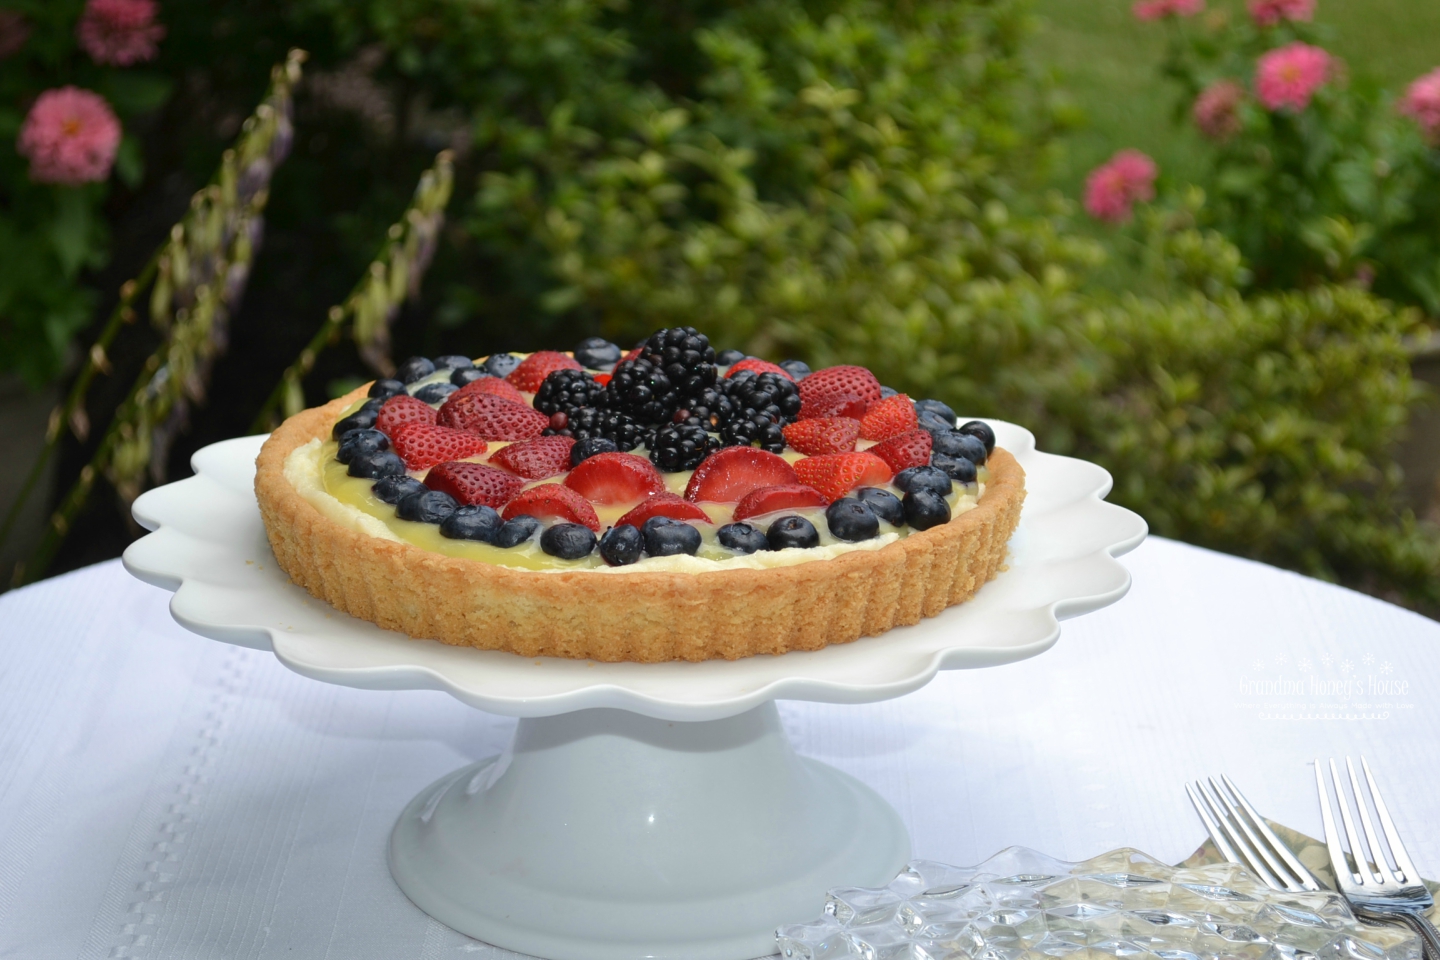 Berry Lemon Mascarpone Cookie Tart is made with a sugar cookie crust that is filled with sweetened mascarpone cheese, lemon curd, and topped with fresh berries.